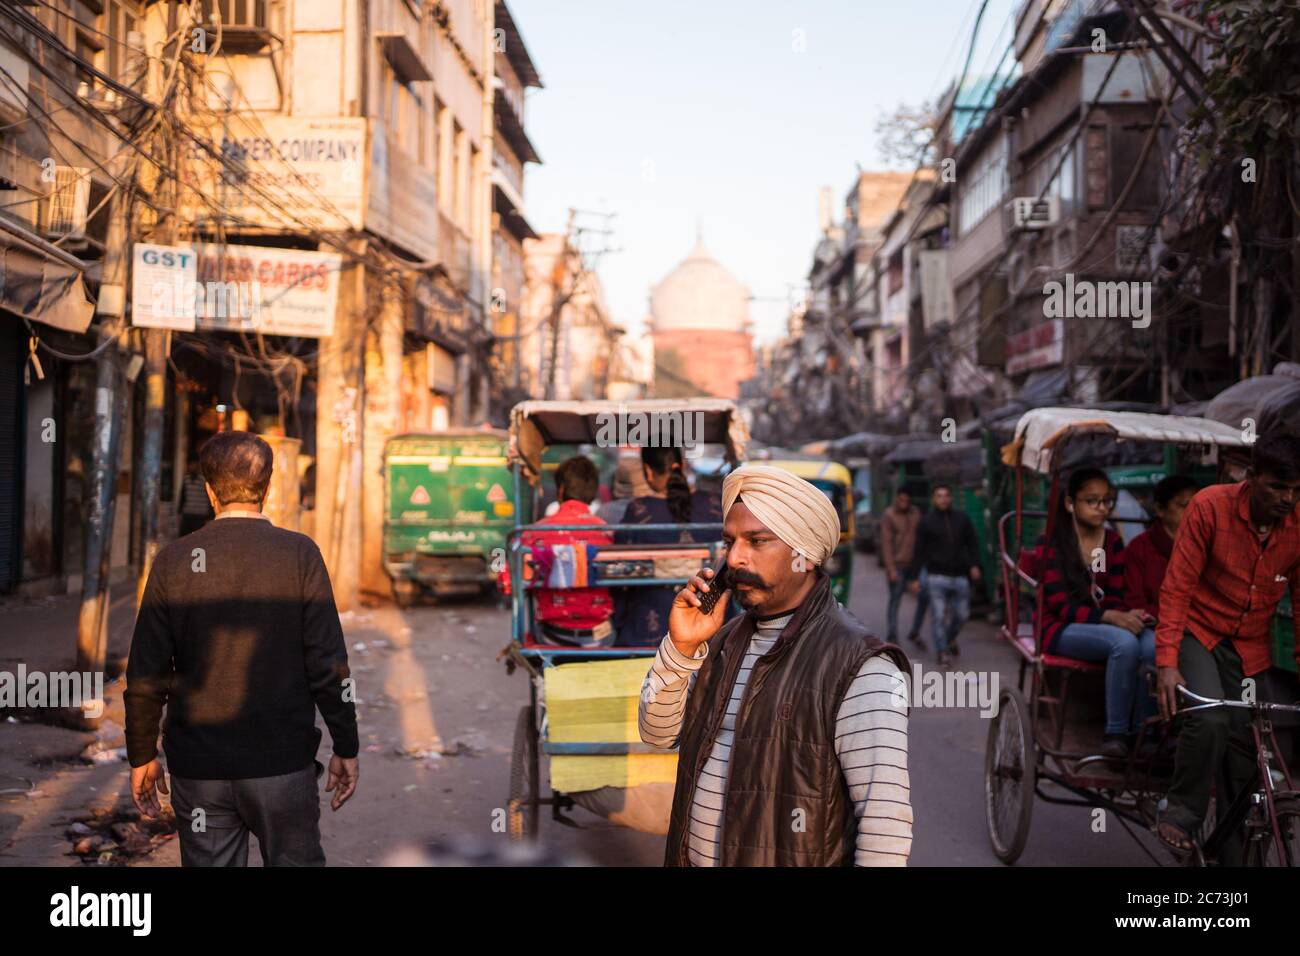 New Delhi / India - February 18, 2020: candid portrait of Sikh Indian man walking and talking by phone in Old Delhi Stock Photo